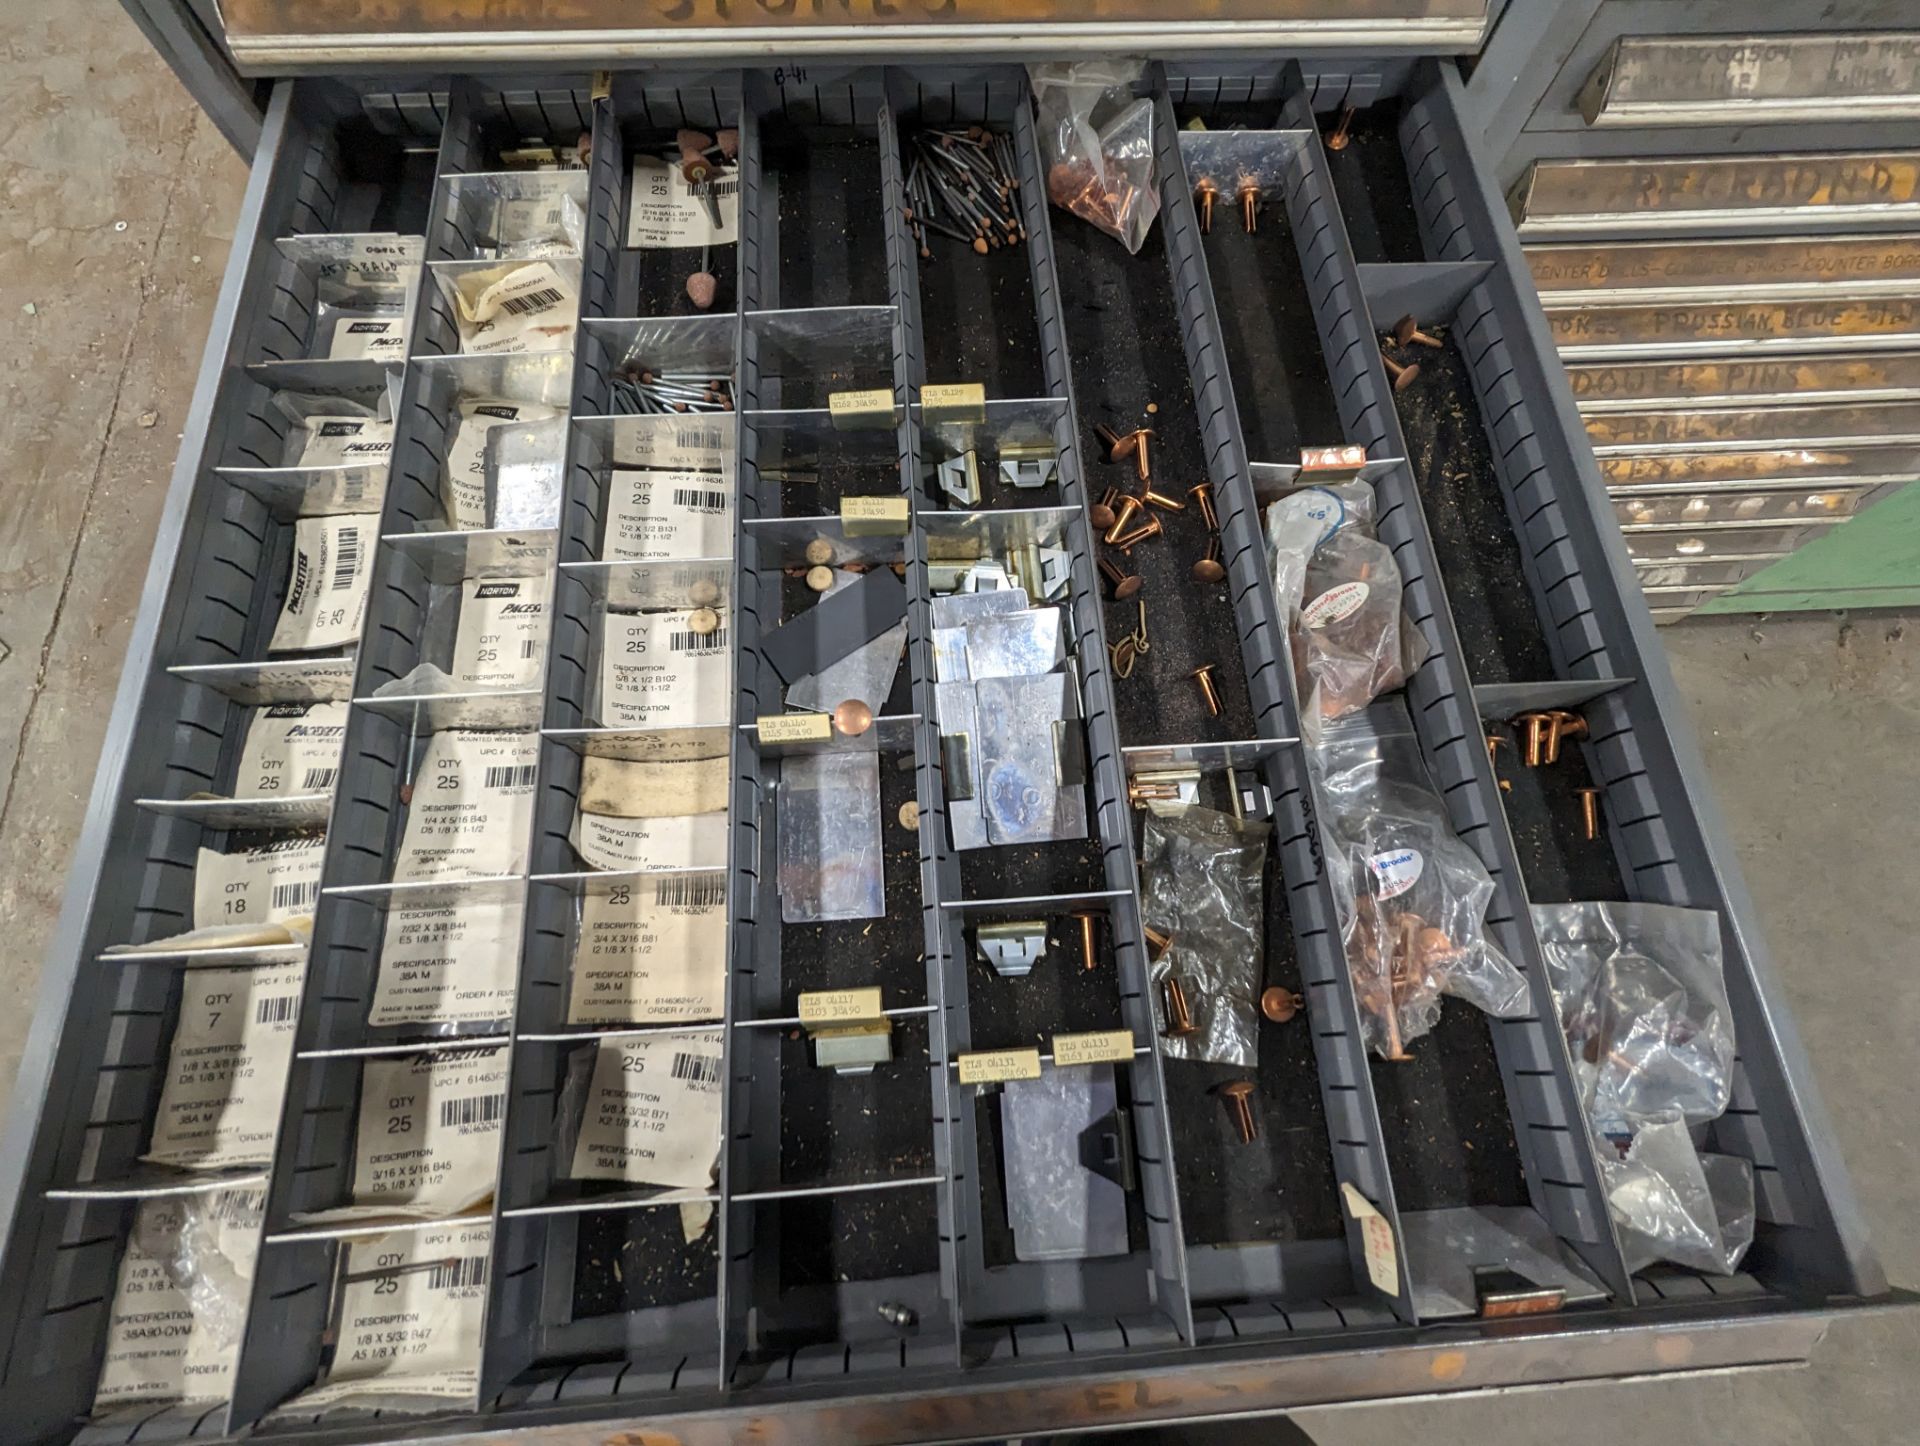 VIDMAR STYLE 18 DRAWER PARTS CABINET WITH CONTENTS: BITS; REANIERS; HELI-COILS; BUSHINGS; TAPS; - Image 3 of 5